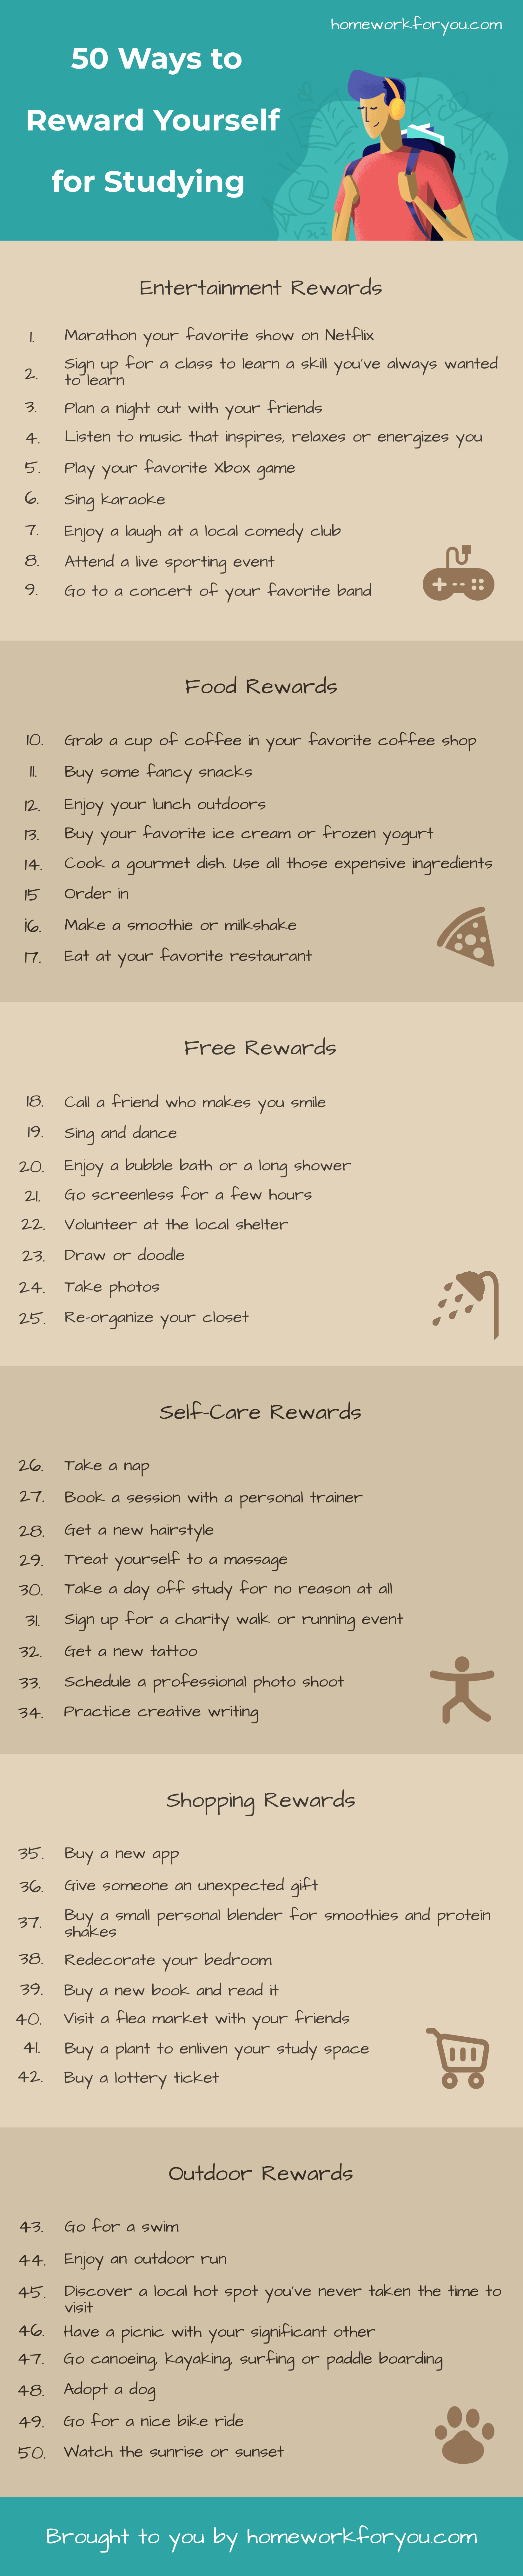 50 Ways To Reward Yourself For Studying